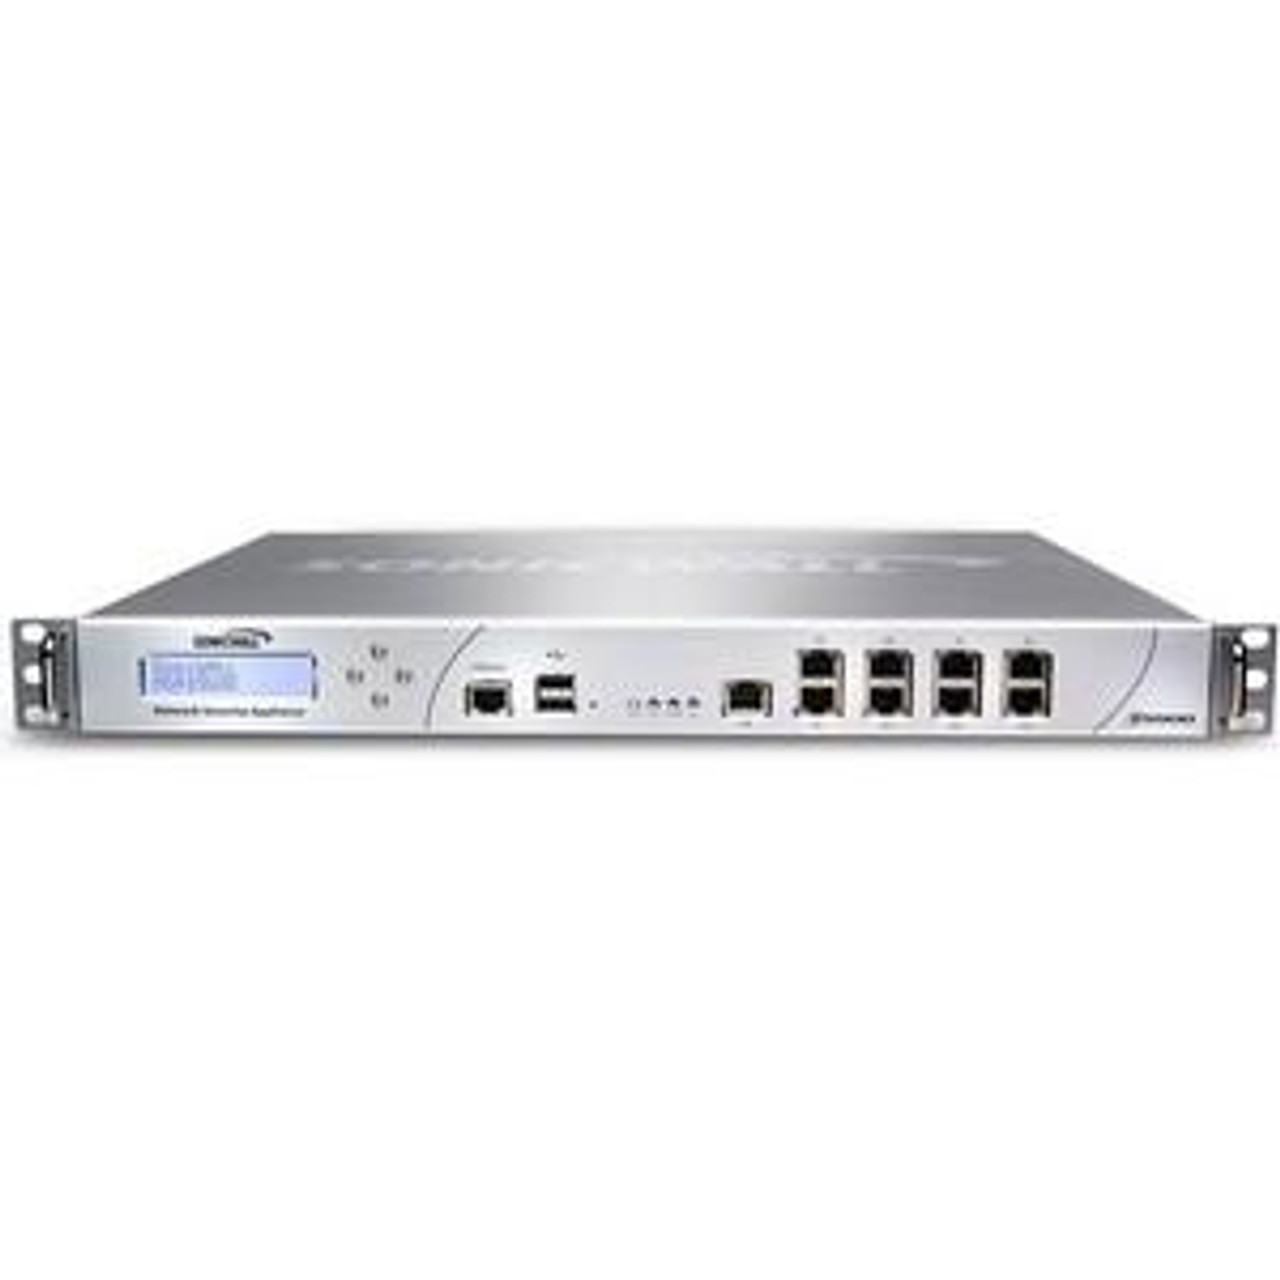 01-SSC-7029 SonicWALL NSA E5500 Unified Threat Management 8 x 10/100/1000Base-T LAN 2500 User (Refurbished)